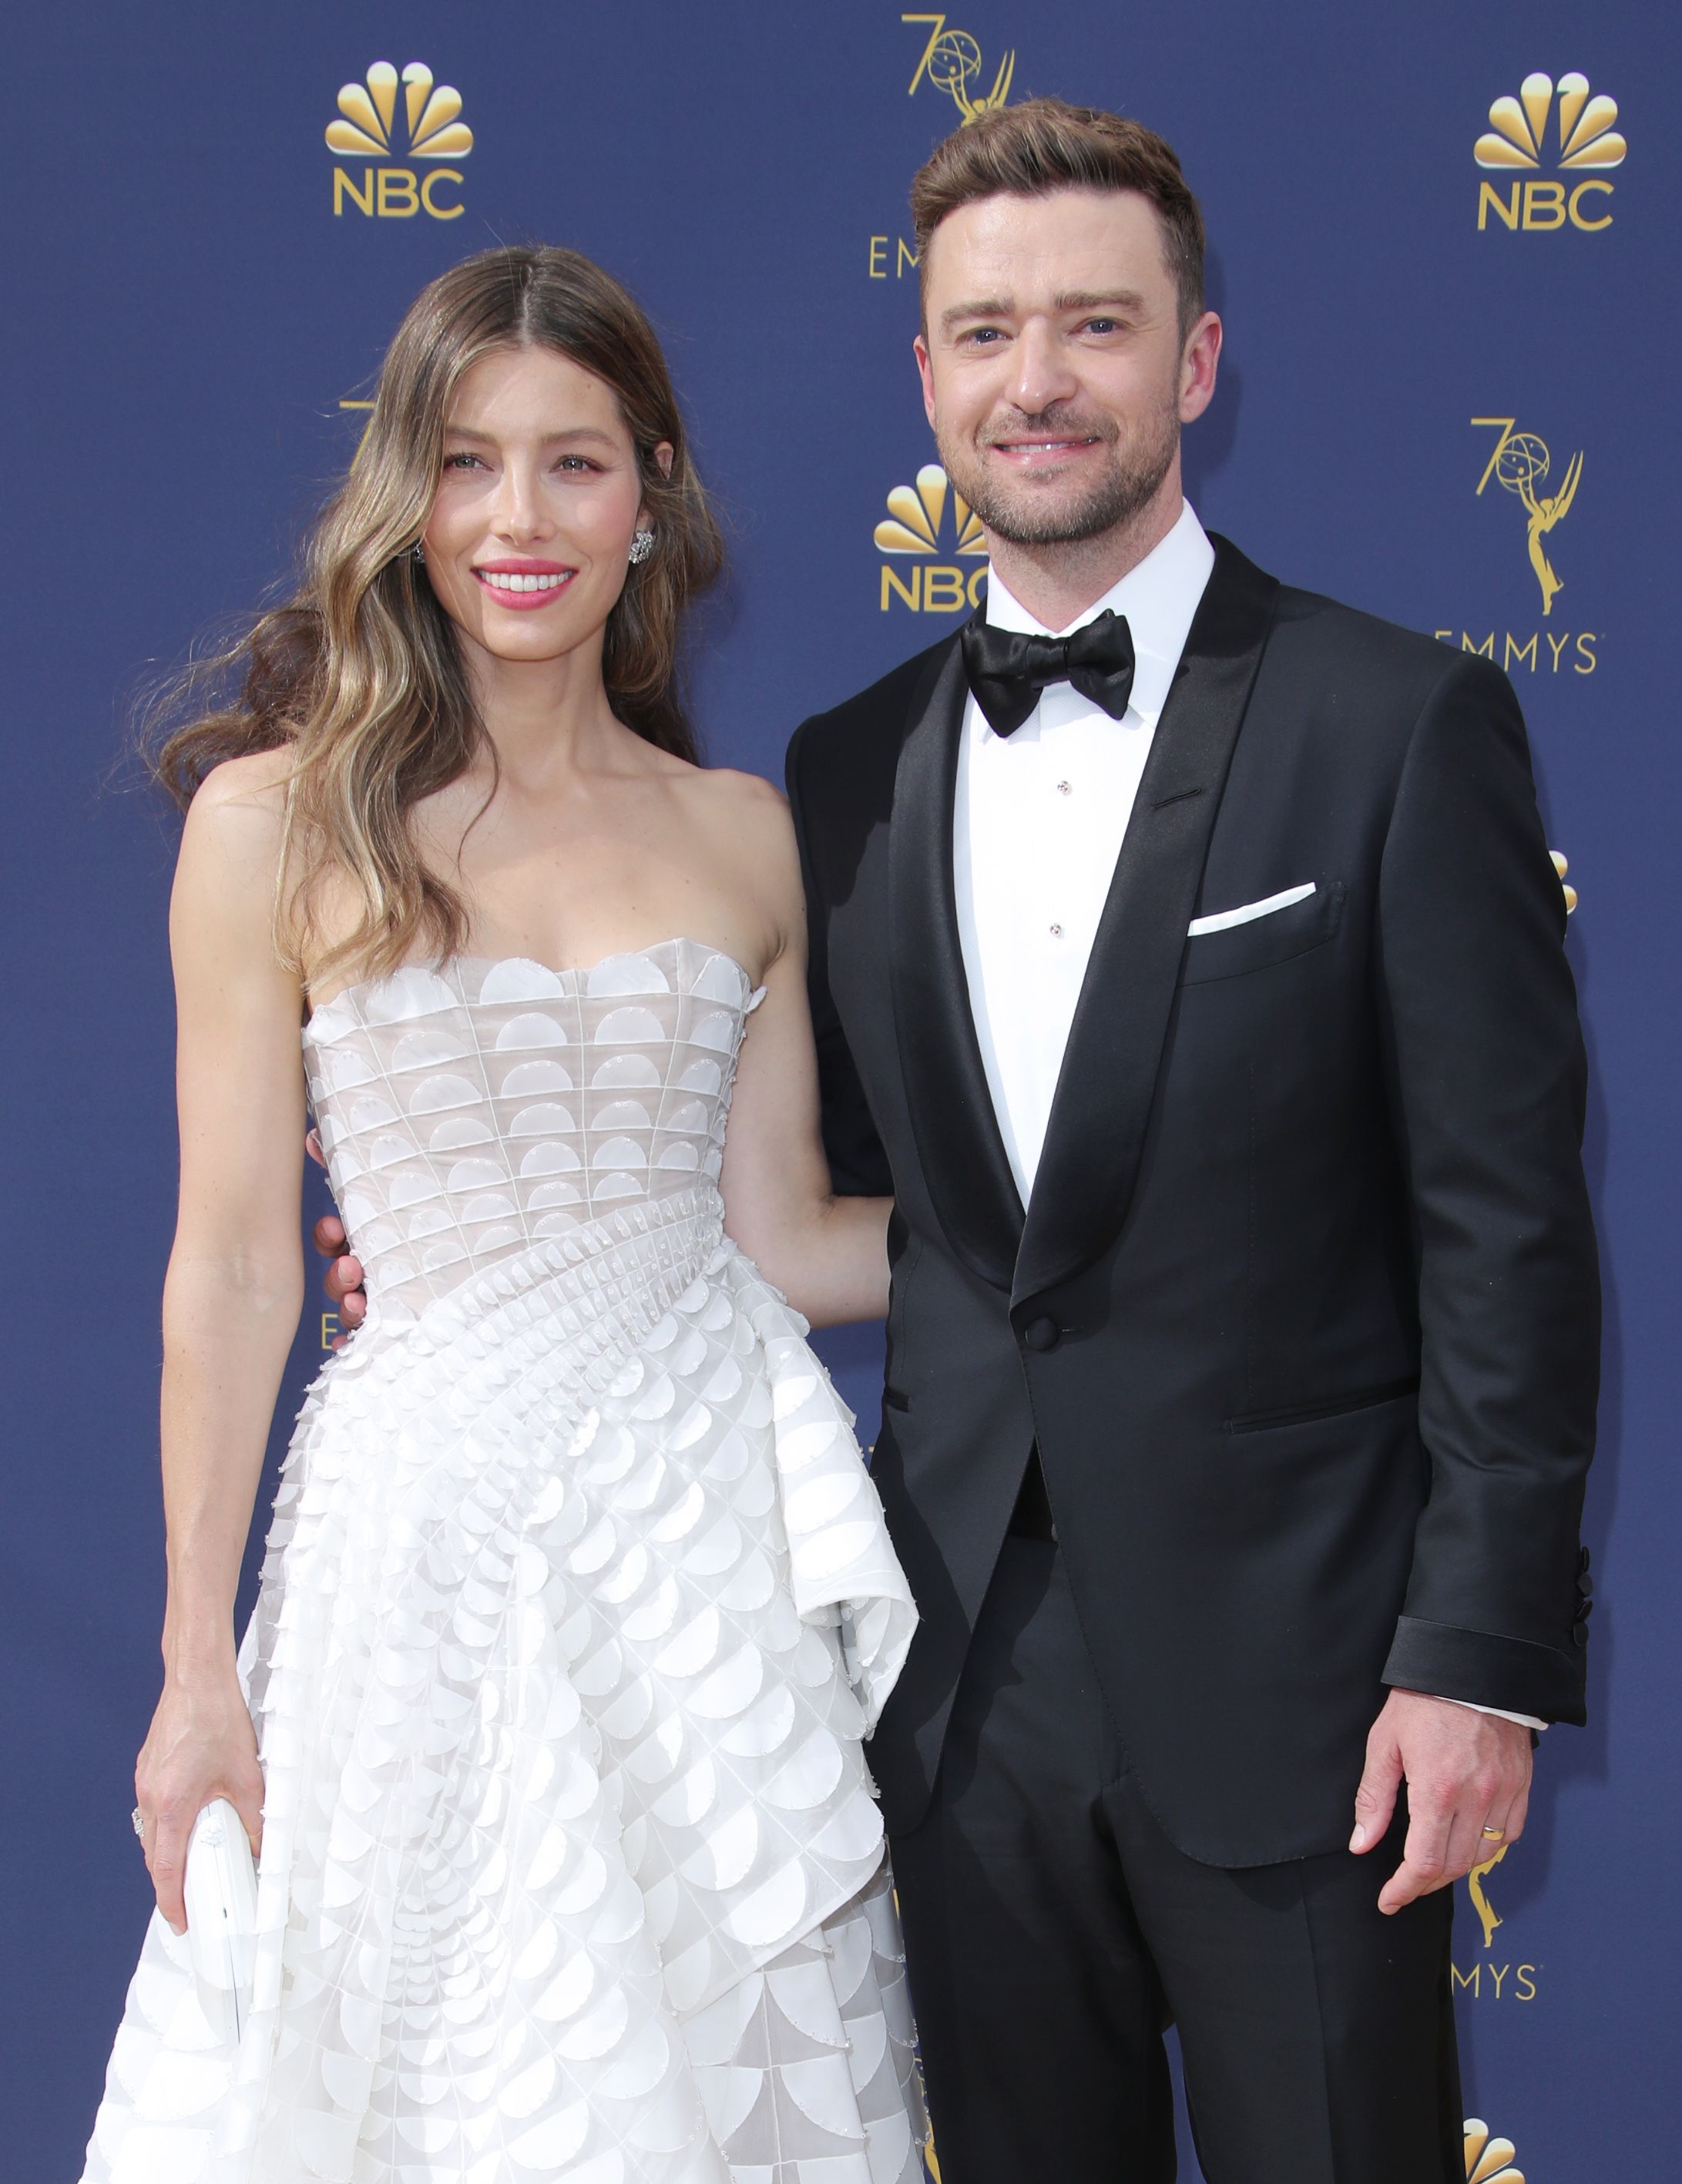 <p>In his 2018 book "Hindsight & All the Things I Can't See in Front of Me," Justin Timberlake opened up about how his relationship with wife Jessica Biel started and later blossomed. They met at a surprise party in a private Hollywood speakeasy-style where they were talking in a group. "I made some sort of sarcastic comment, really dry. Nobody got it except her," she explained. "We talked that night. The DJ played 'Lucky Star,' and we danced. And then she was gone." He kept thinking about her, and when a mutual friend asked to bring Jessica to the opening night of JT's "FutureSex/LoveShow" tour in San Diego on Jan. 8, 2007, Justin was thrilled. He gave the actress and her friends a ride to the next city, which was closer to Los Angeles, on his tour bus. That night, Justin -- who'd recently split from Cameron Diaz -- got her number. They spoke on the phone for days, met up at a Golden Globes party a week later and "from that moment on, we started dating." But they weren't exclusive -- yet. "We were both still seeing other people, keeping ourselves safe from getting hurt, from really putting ourselves out there. It took a bit for both of us to admit to ourselves that we were really, really that into each other," Justin explained in his book. "When I came back from tour, we spent a month together. After that, I said, 'I really want to be exclusive.' And, somehow, she said, 'So do I.'"</p>